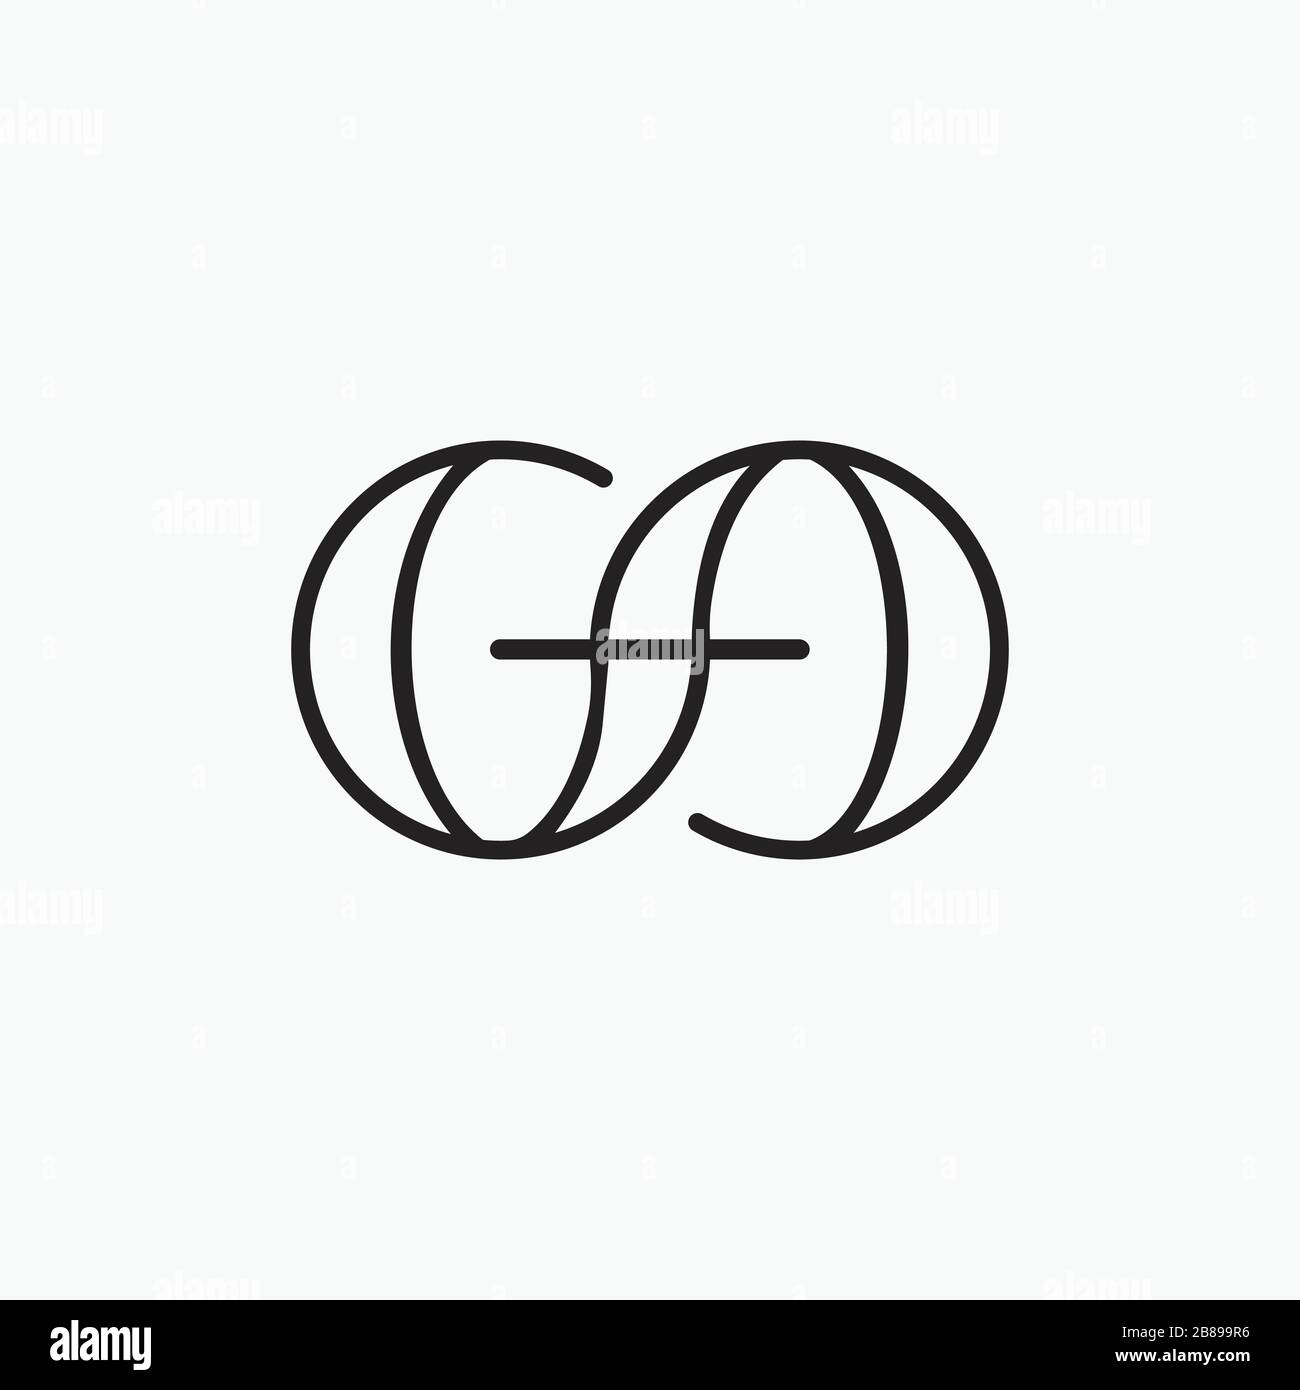 Gs Logo High Resolution Stock Photography And Images Alamy